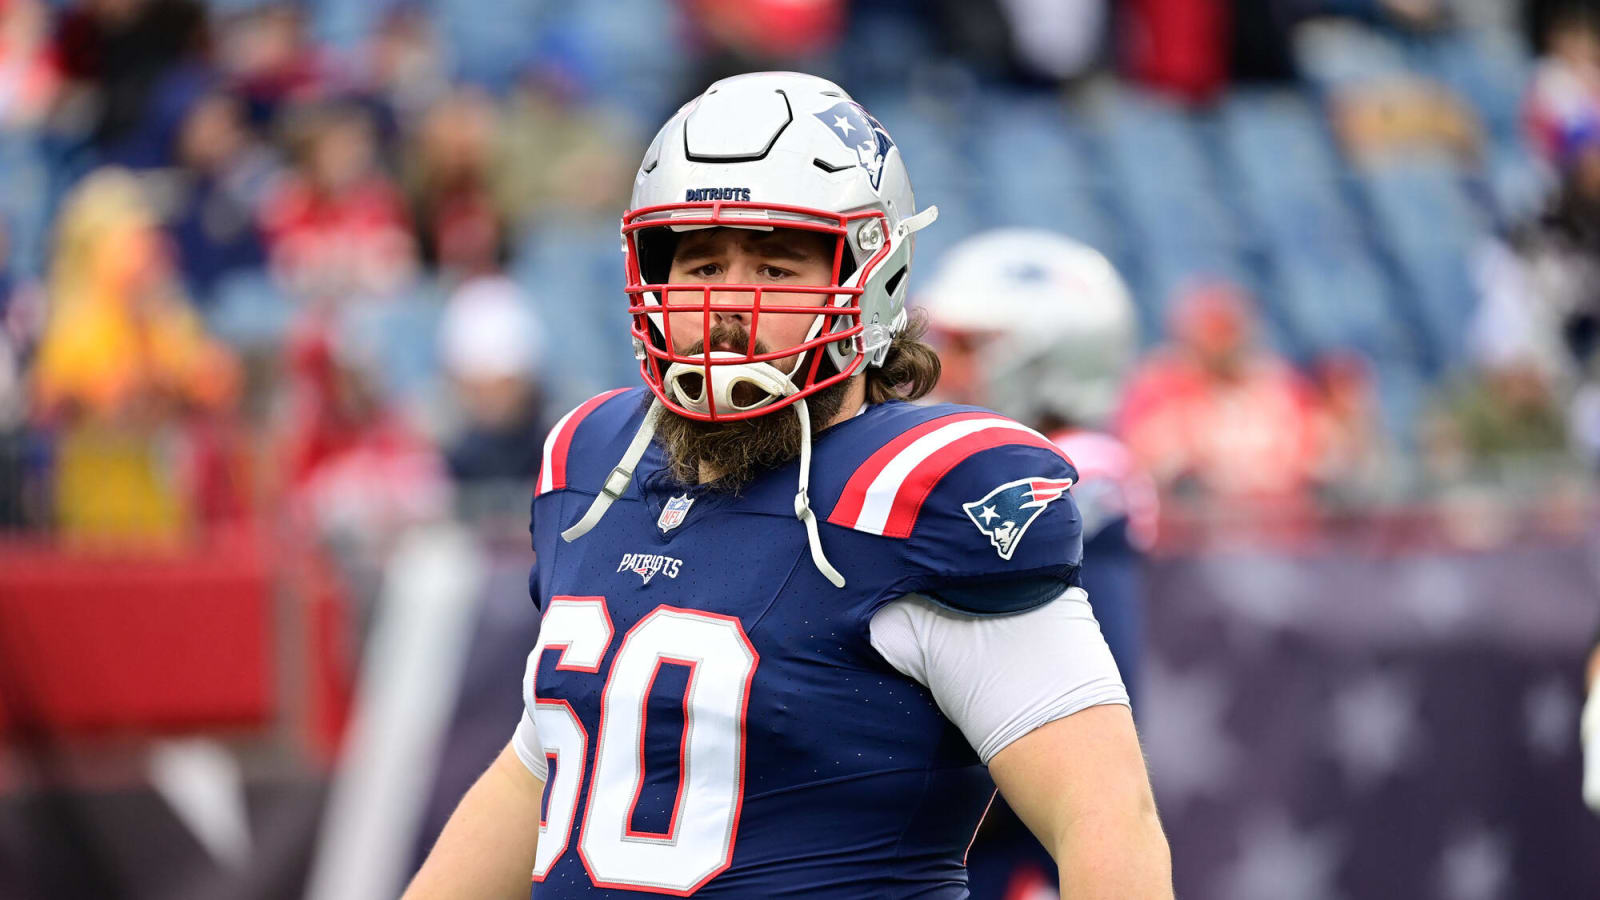  In a lost season, David Andrews has been a shining light